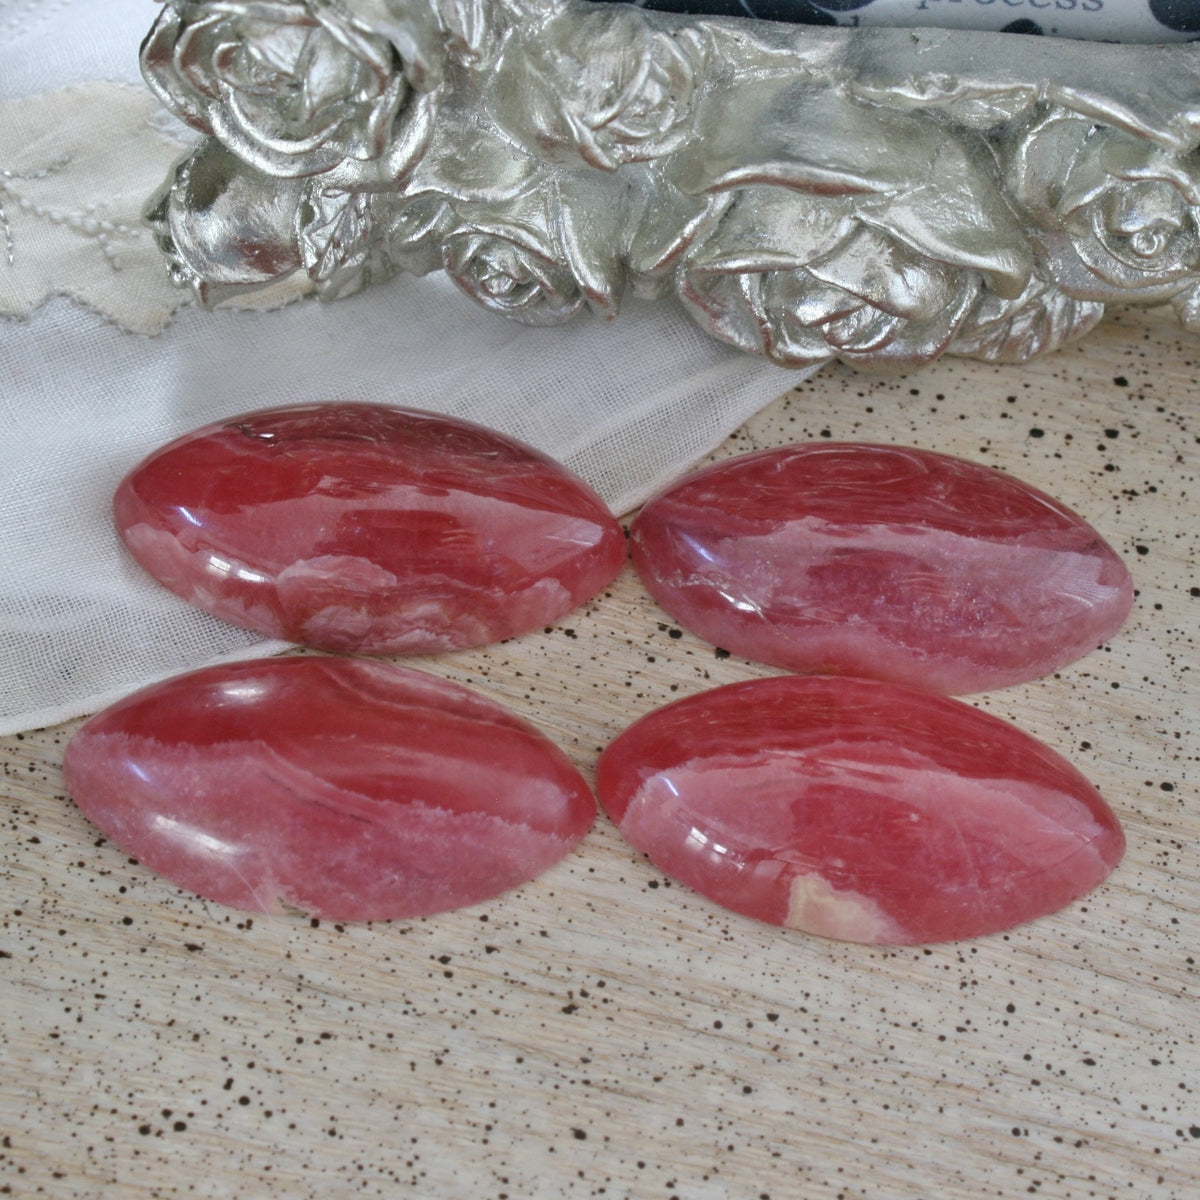 ONE Rhodochrosite Gemmy Marquise Cabochons from Argentina, 51 to 53 ct. each